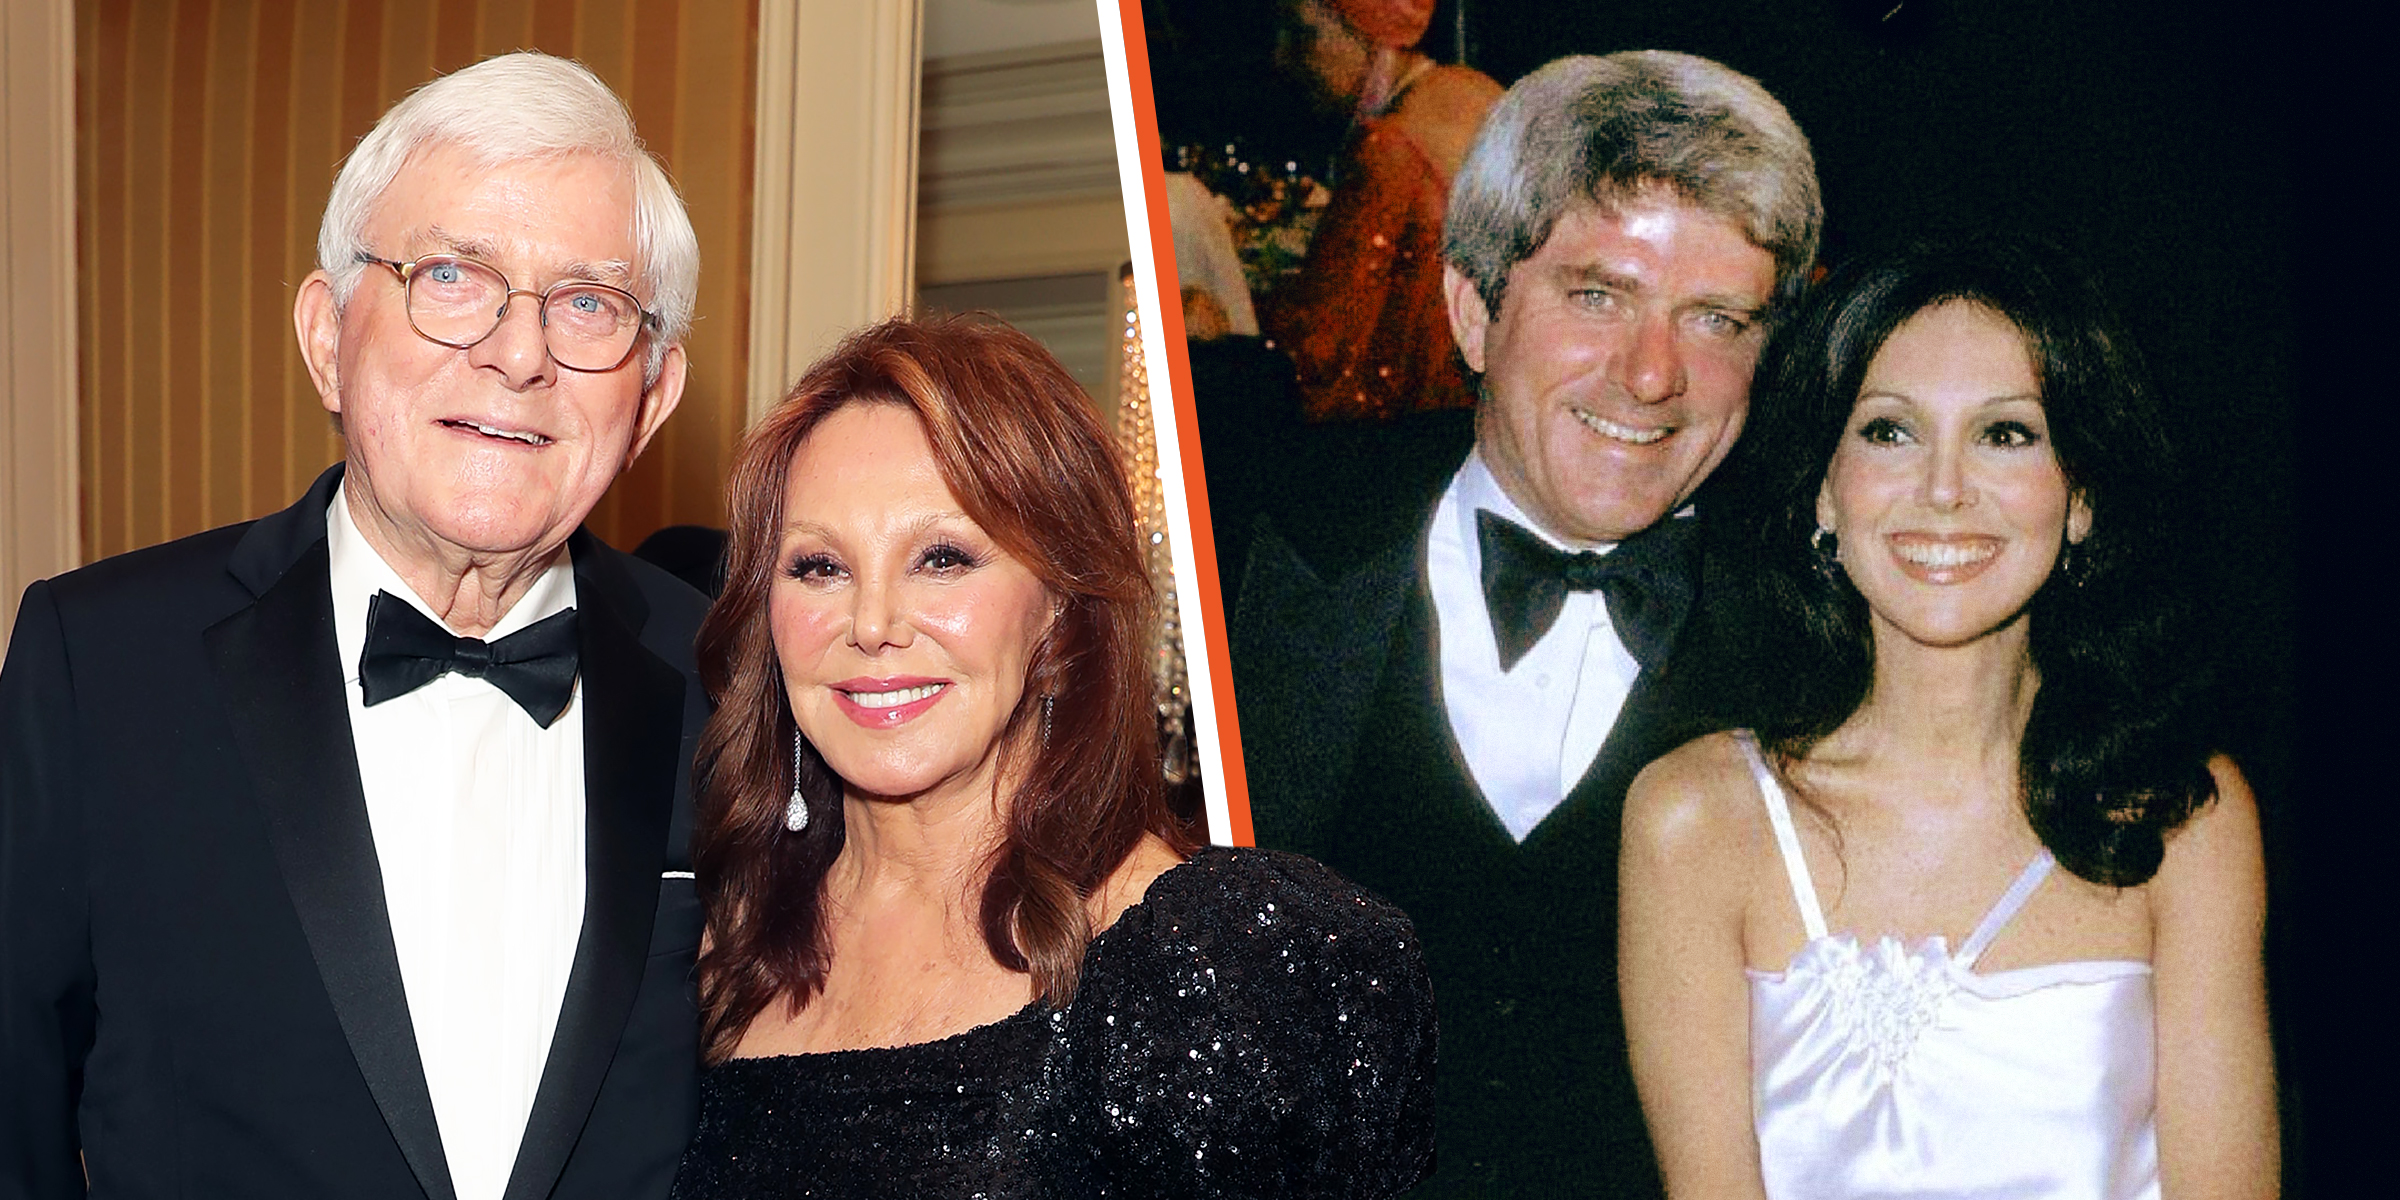 Marlo Thomas and Phil Donahue | Source: Getty Images / Instagram/Marlothomas